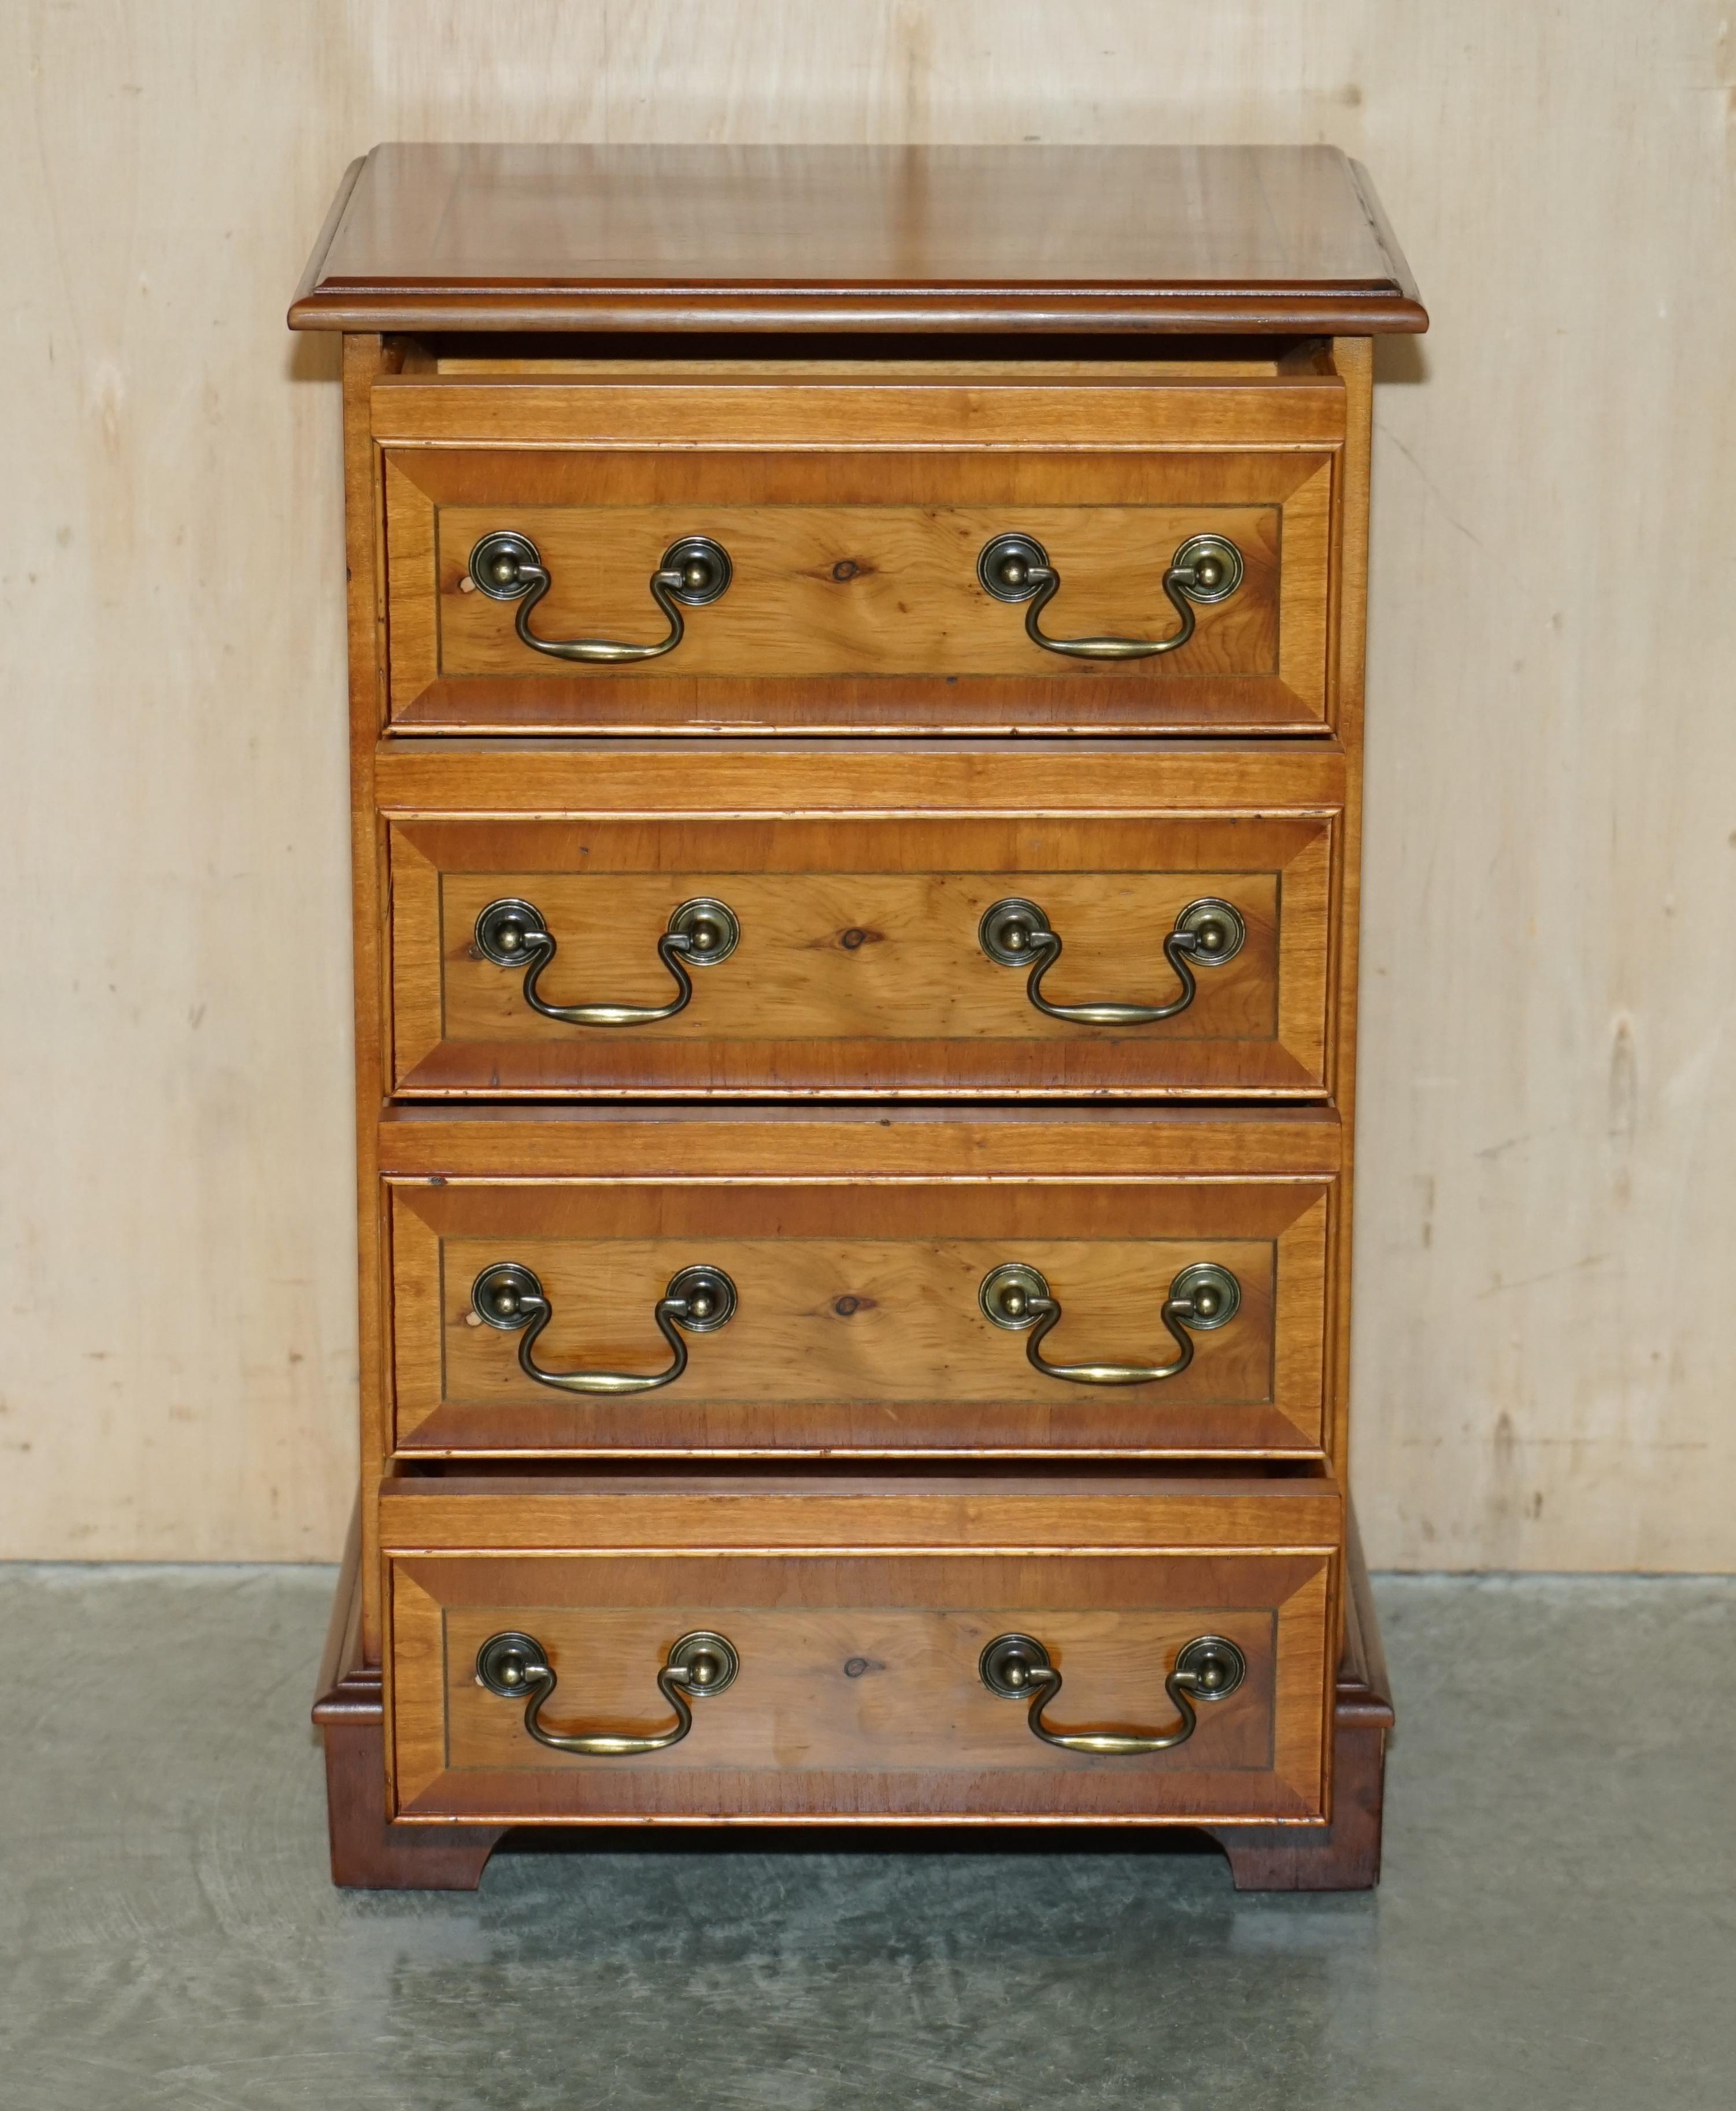 Pair of Burr & Burl Yew Wood Nightstand Bedside Table Sized Chest of Drawers For Sale 10